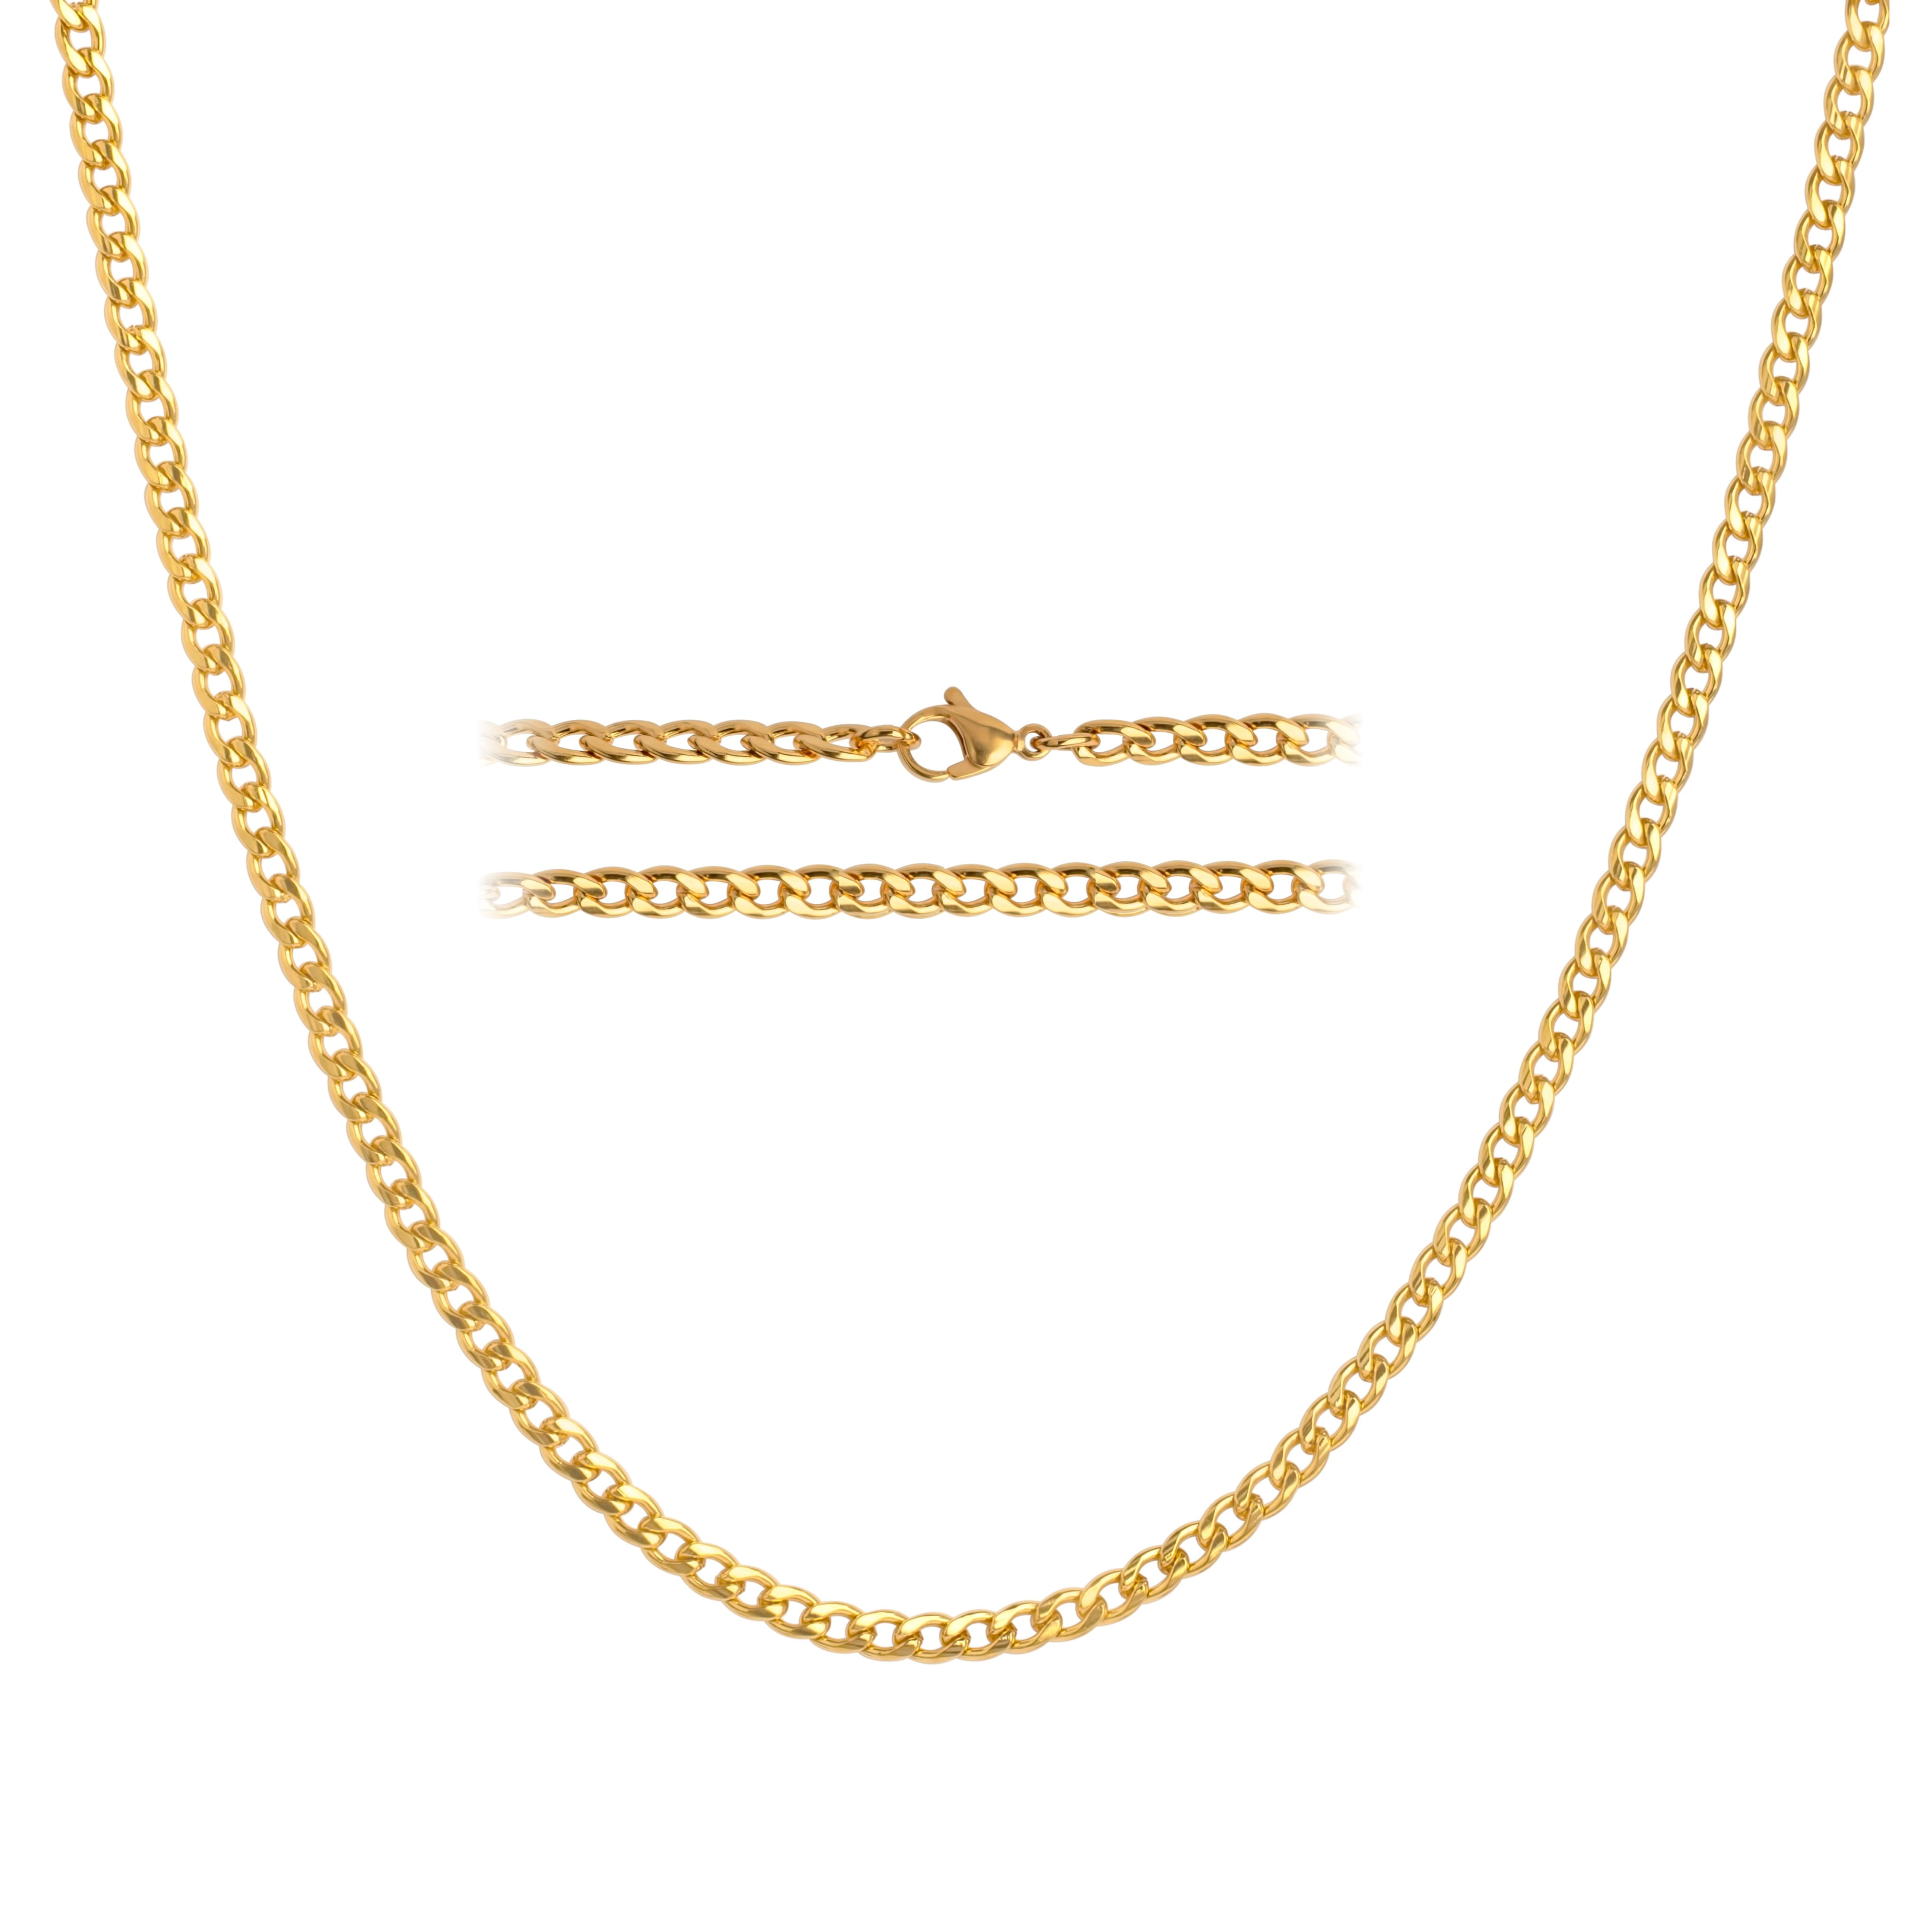 Maalgodam 21 Inches,20 Grams Gold Chain For Men Boys Women Girl Trendy  Fancy Stylish Chain Gold-plated Plated Alloy Chain Price in India - Buy  Maalgodam 21 Inches,20 Grams Gold Chain For Men